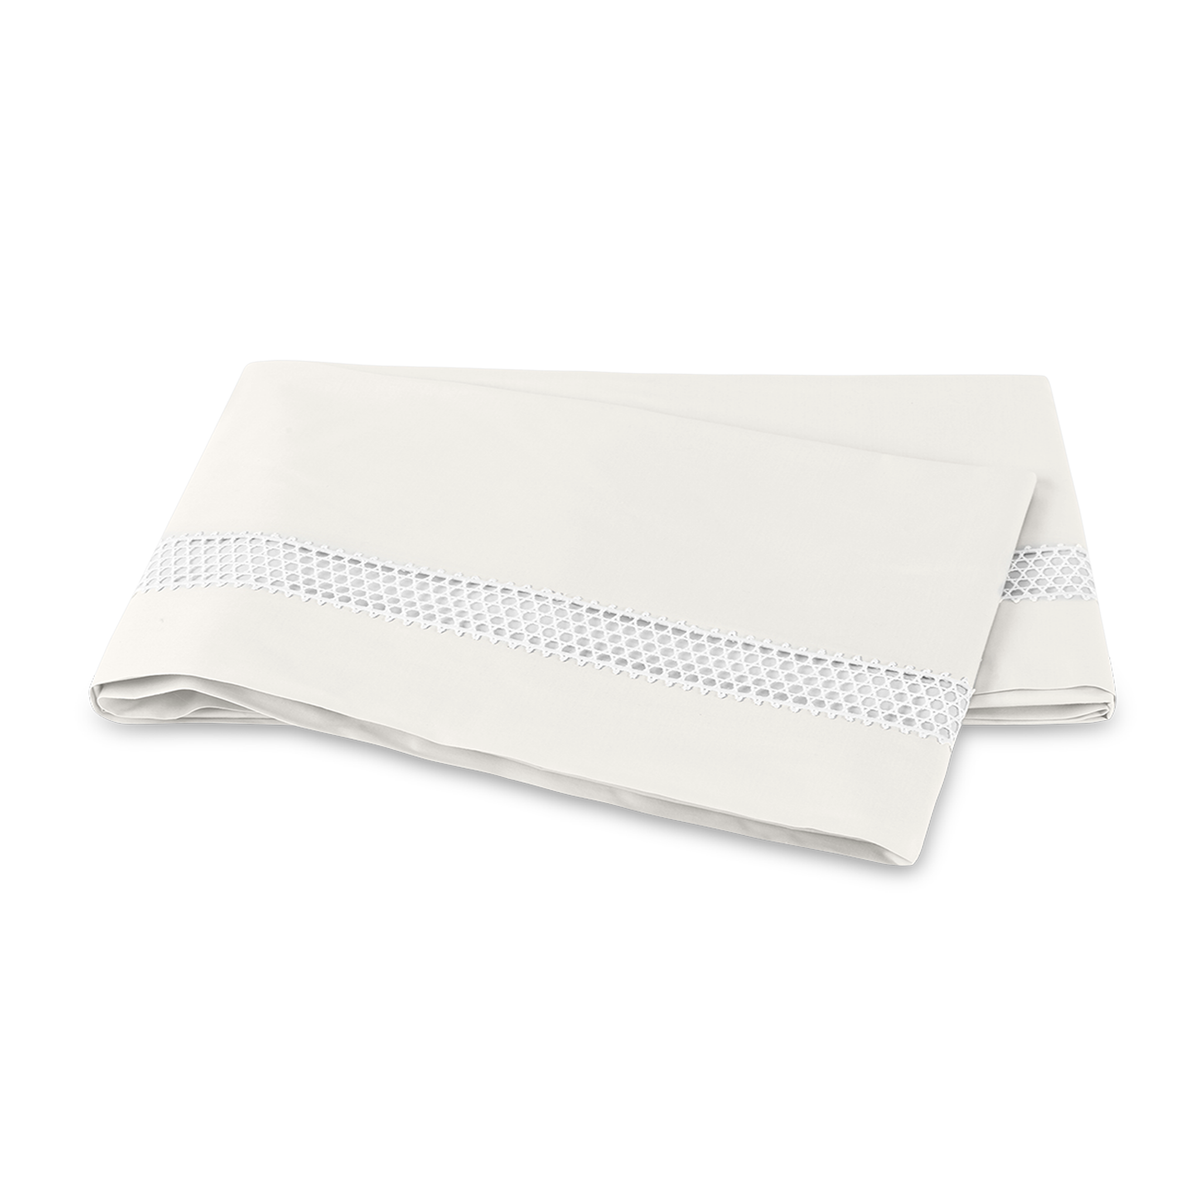 Clear Image of Matouk Cecily Flat Sheet in Bone Color